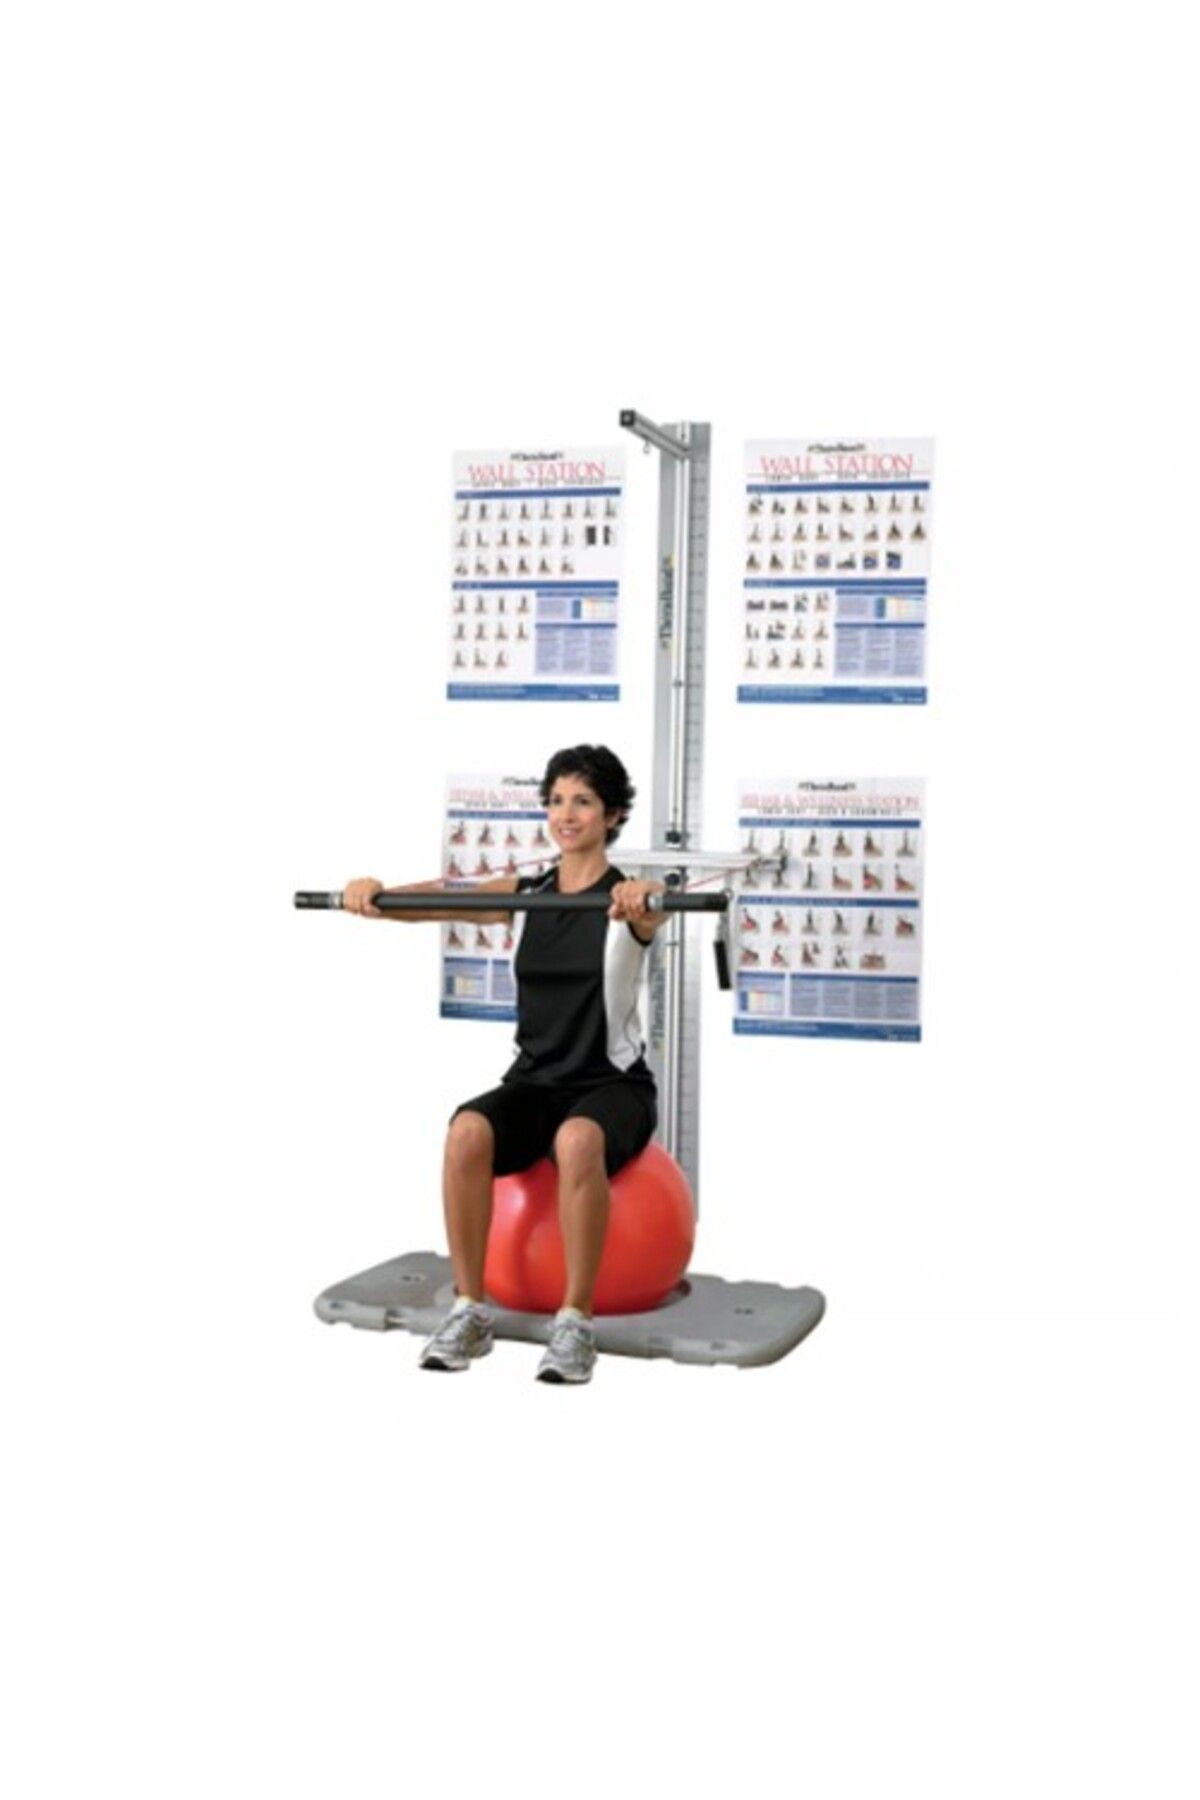 Theraband ® Rehab And Wellness Station